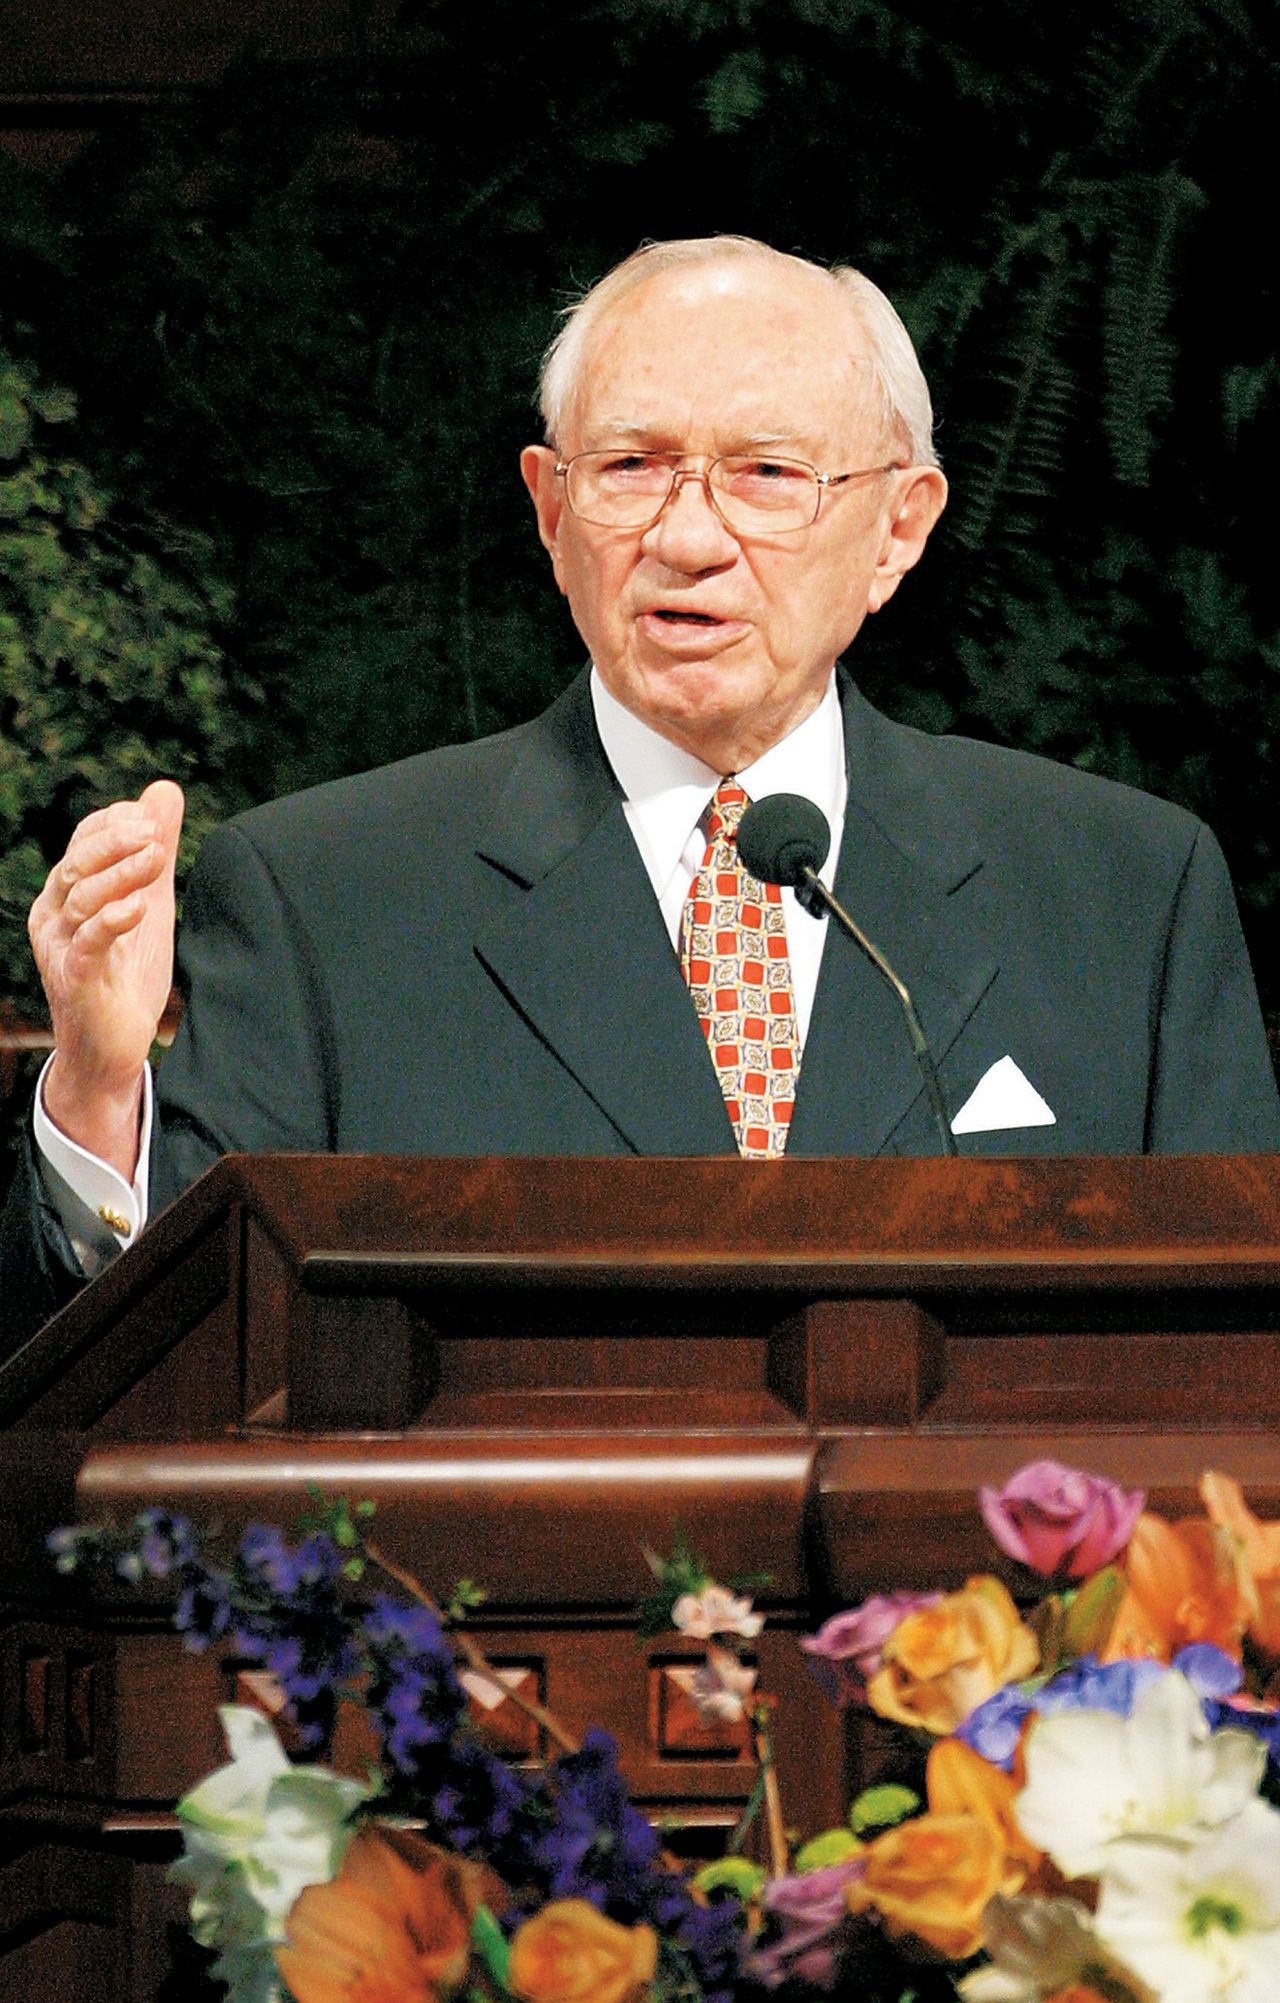 Gordon B. Hinckley speaking from the pulpit at General Conference.